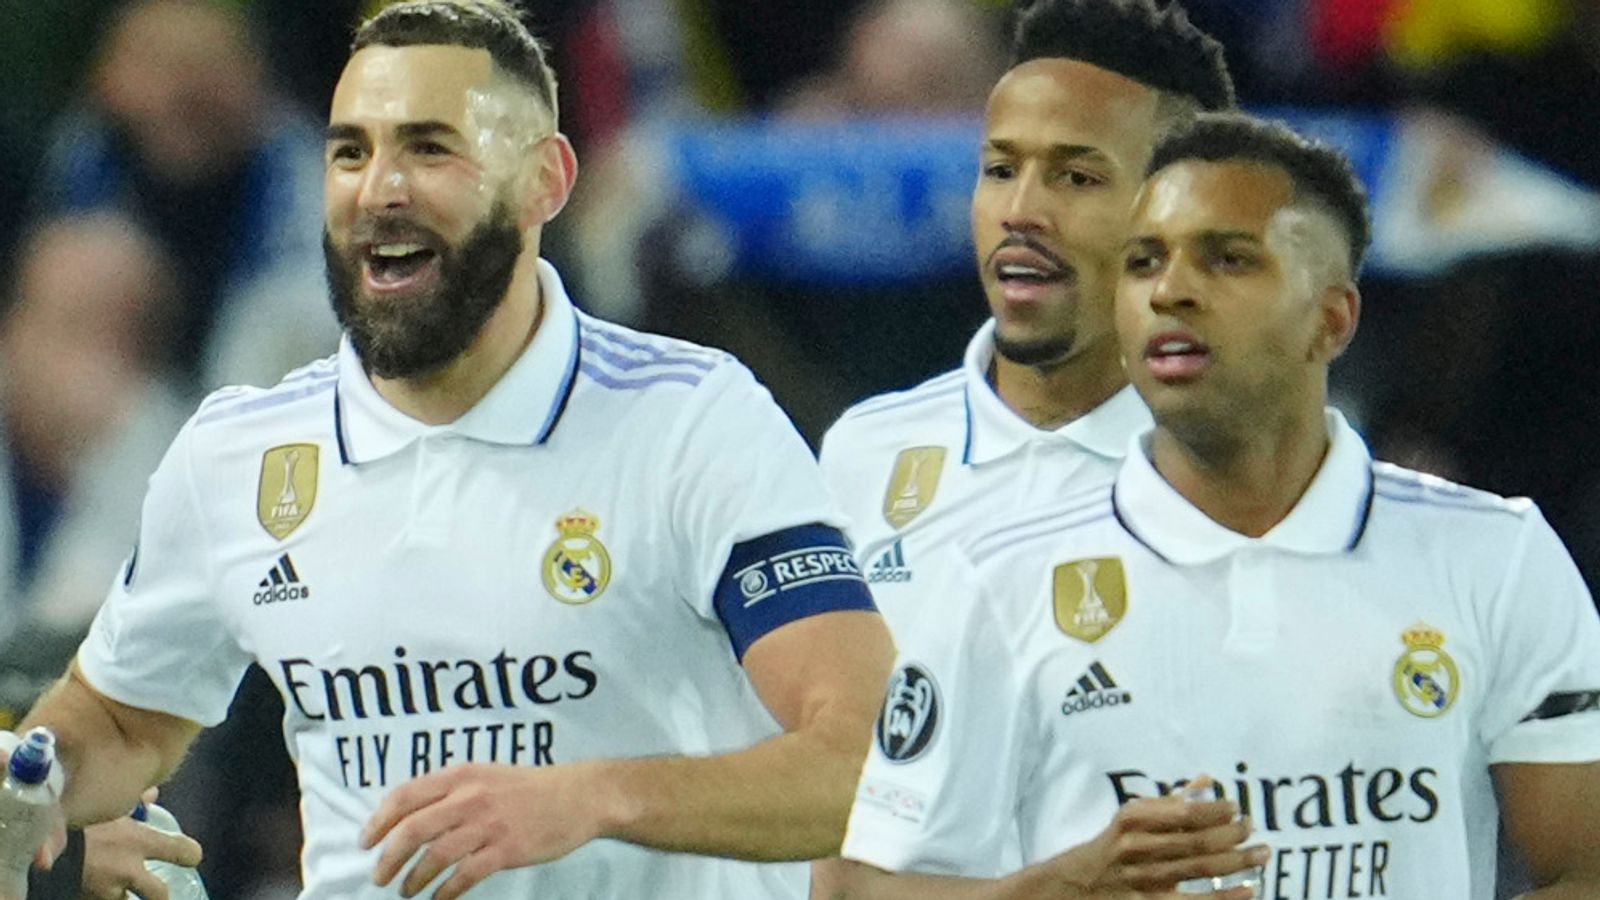 Liverpool 2-5 Real Madrid: Vinicius inspires epic Champions League comeback to leave Jurgen Klopp's Reds reeling - Football News - Sky Sports